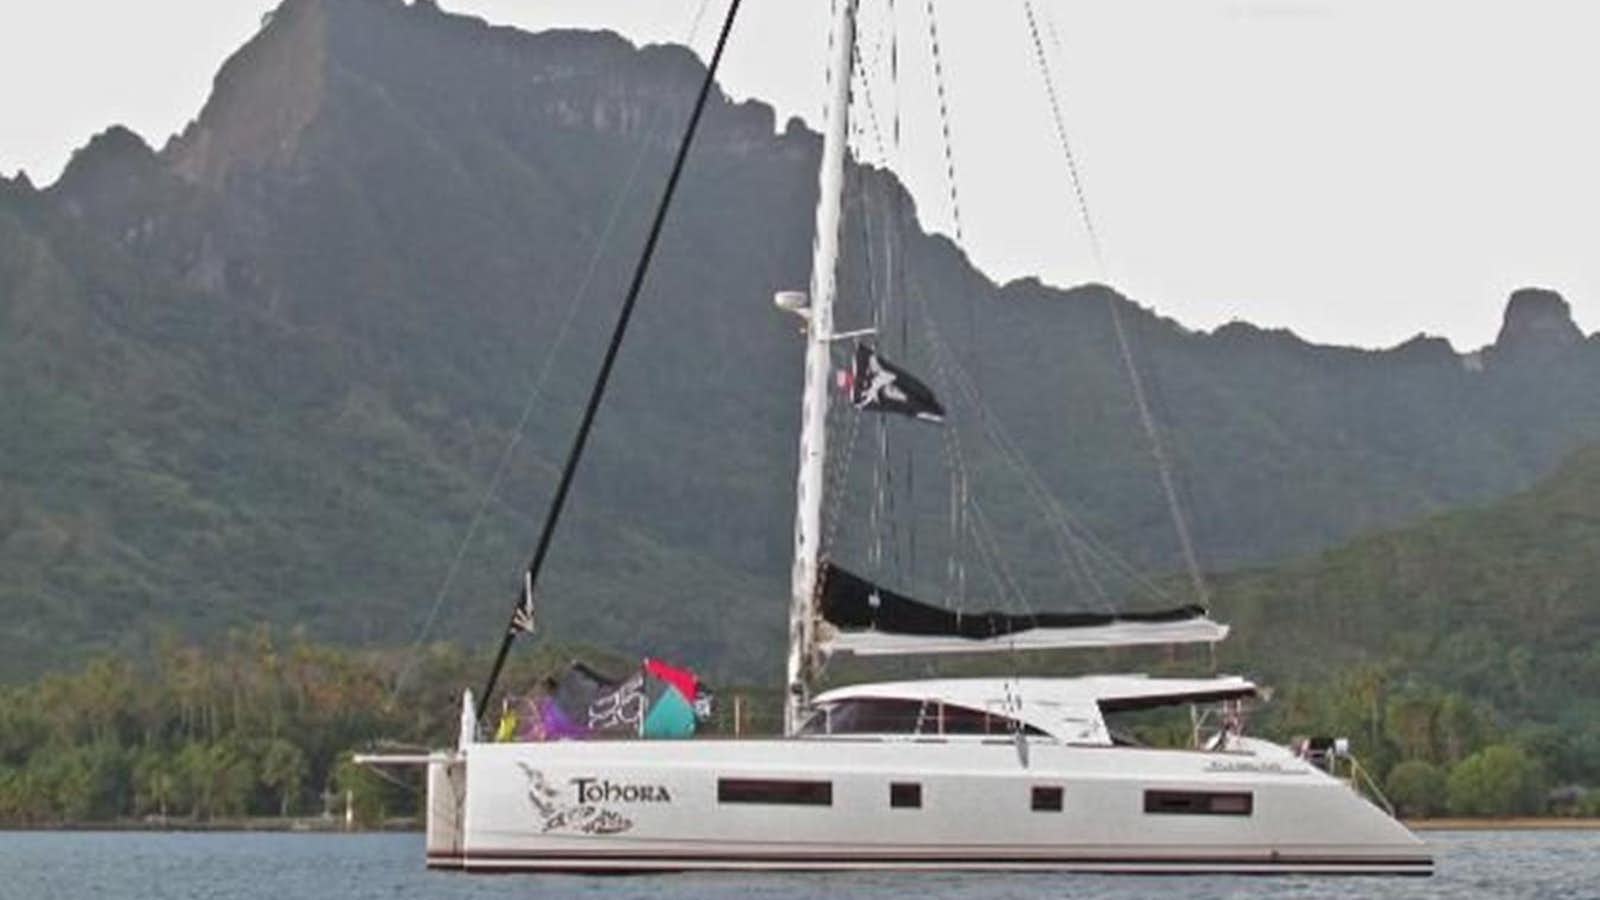 Tohora
Yacht for Sale